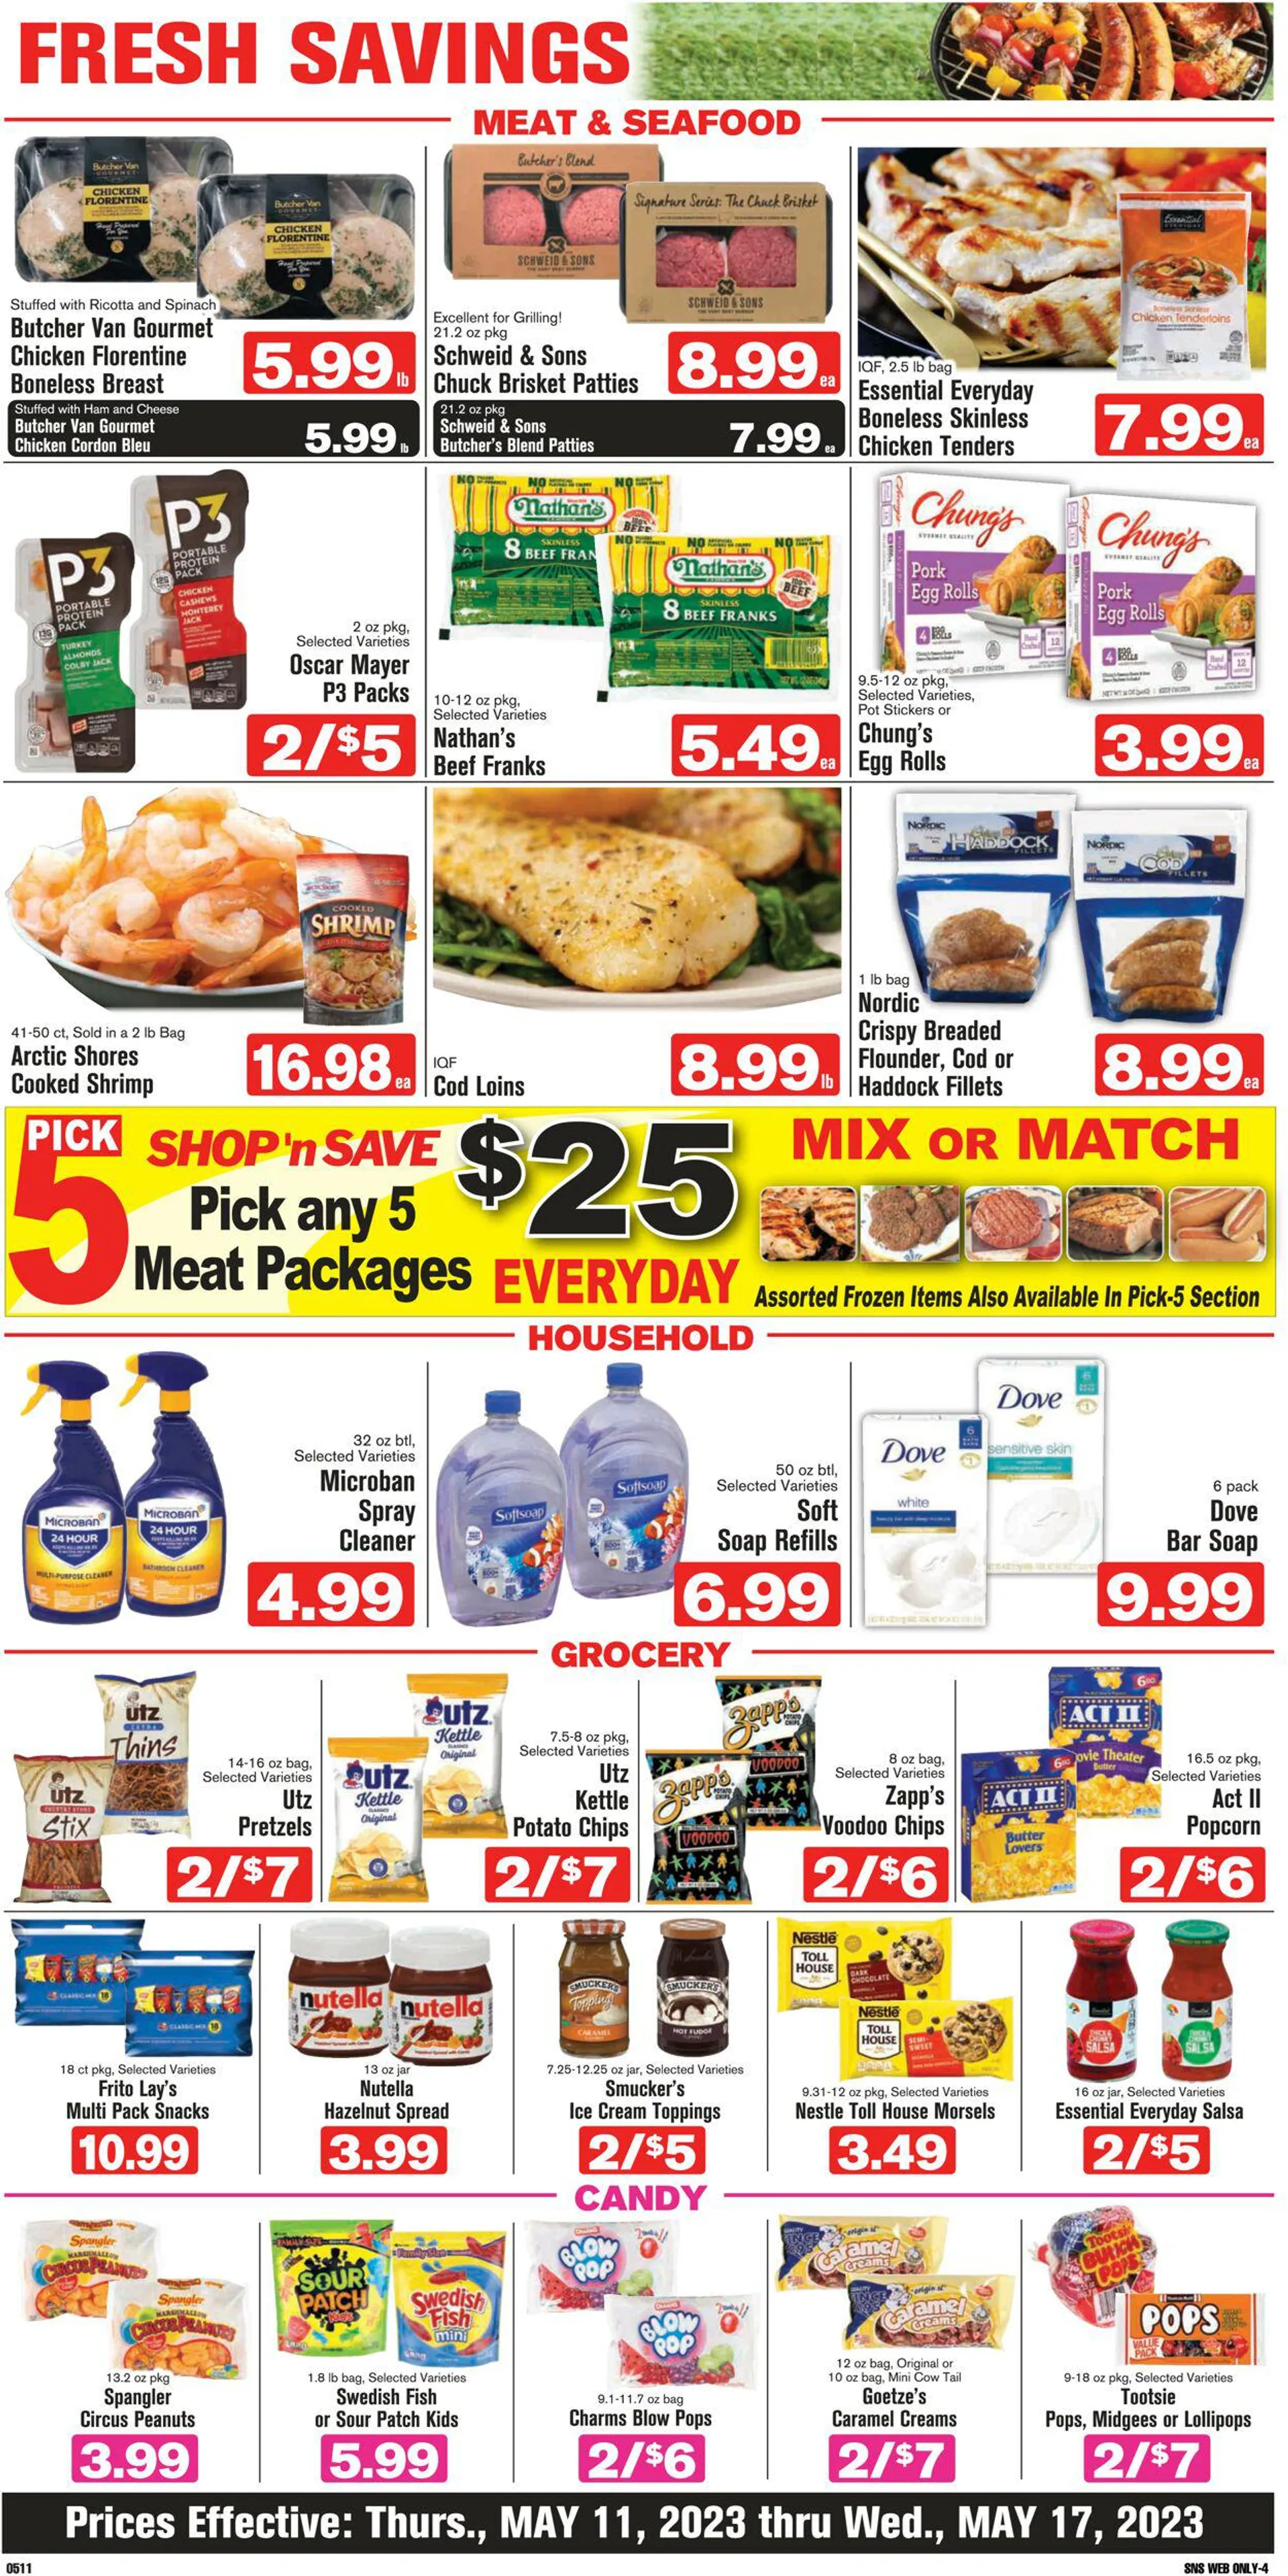 Shop ‘n Save Current weekly ad - 6